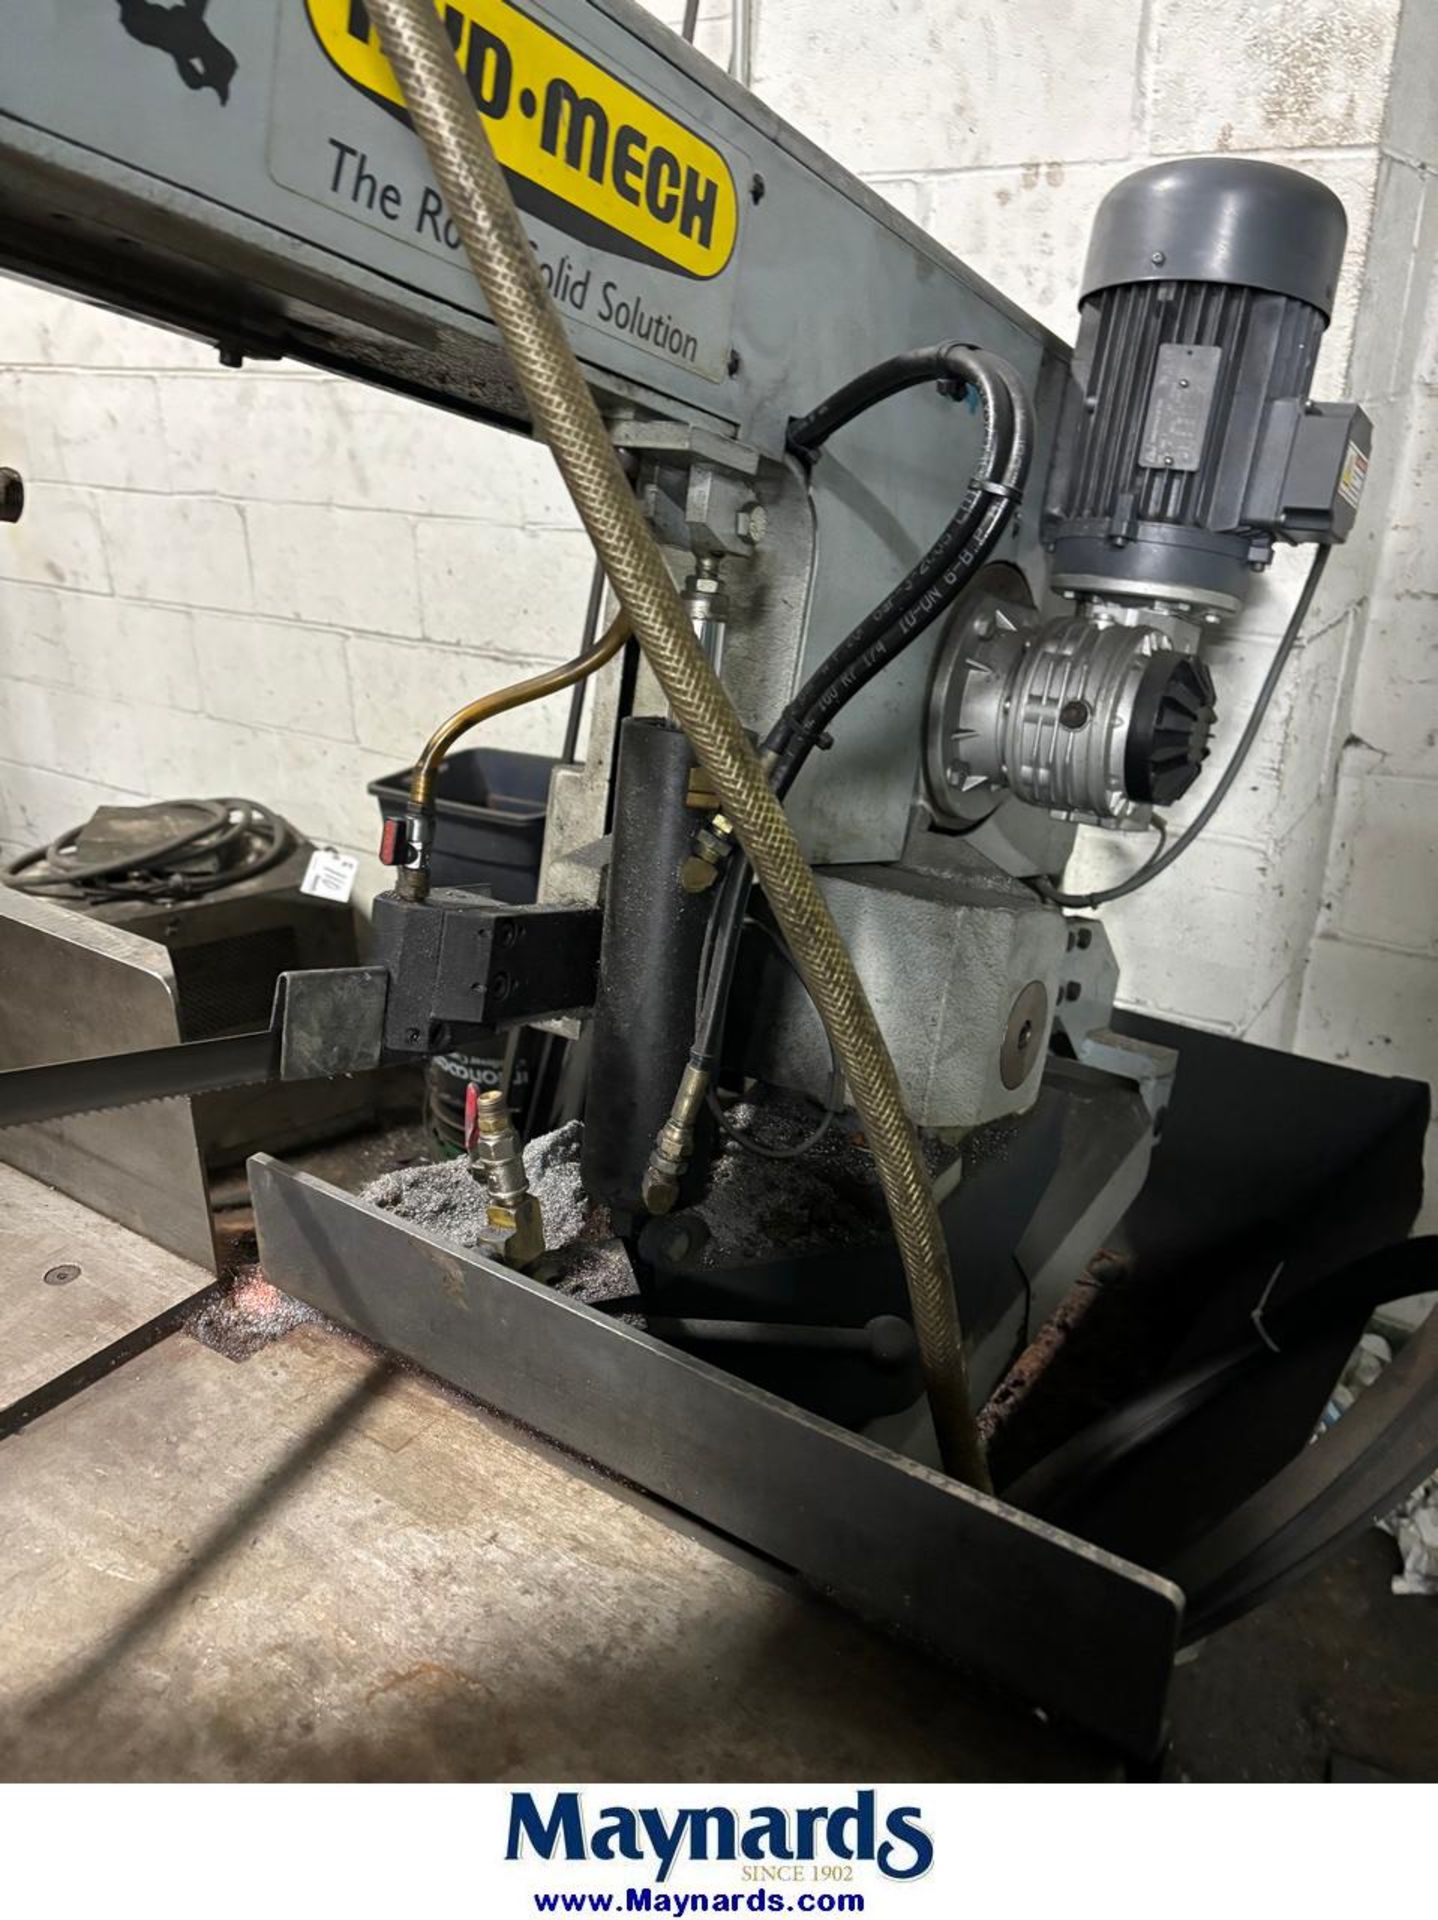 2008 Hyd-Mech S20 BANDSAW - Image 3 of 6